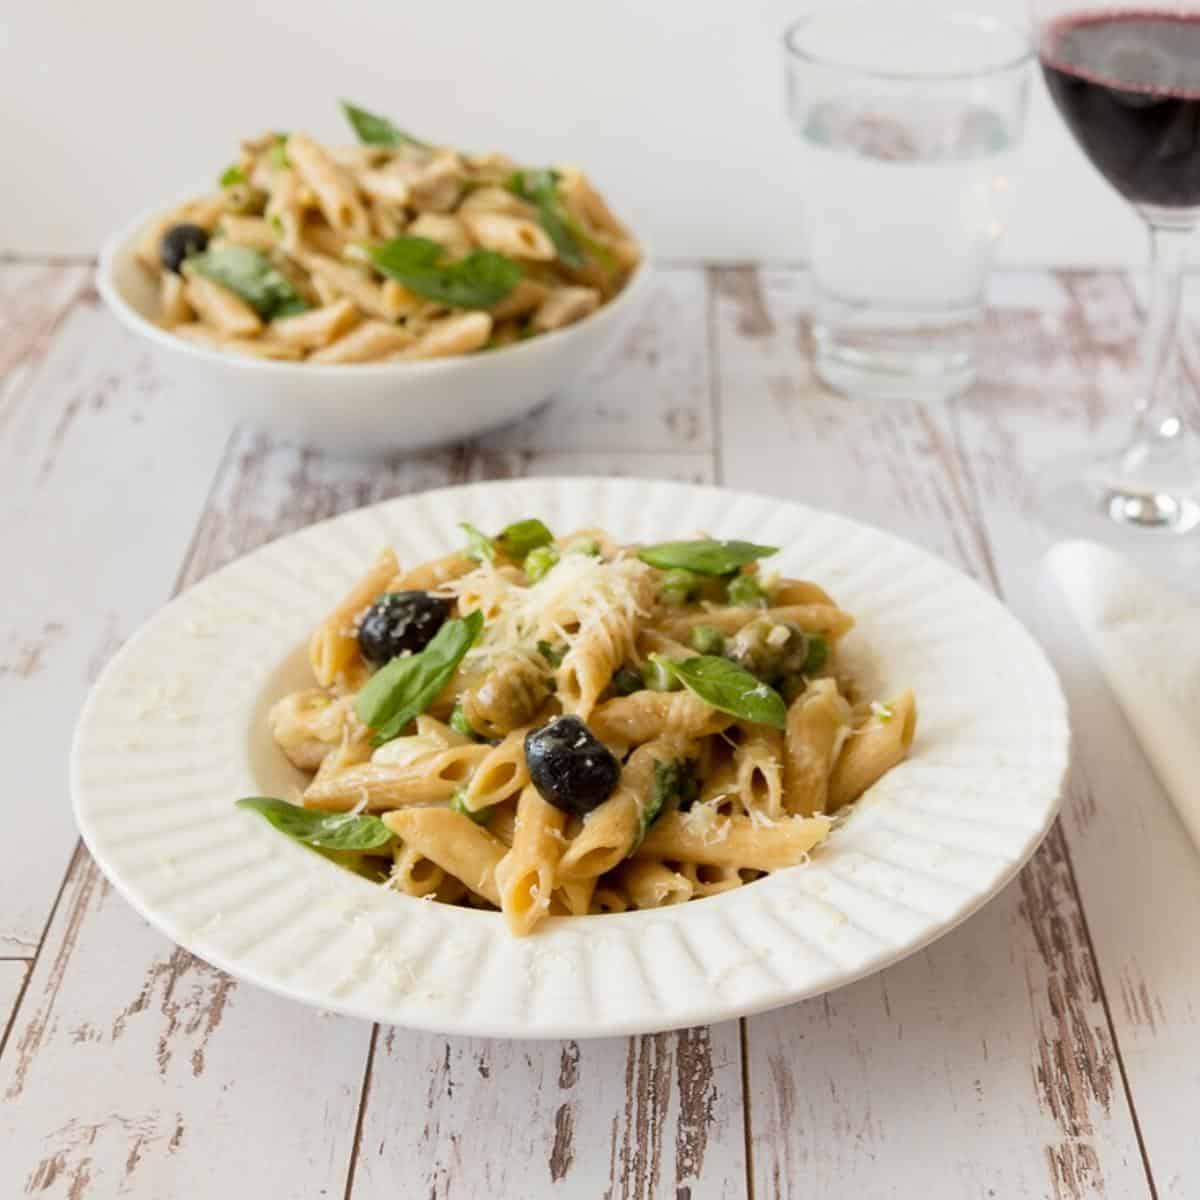 A plate with chicken pasta recipe.